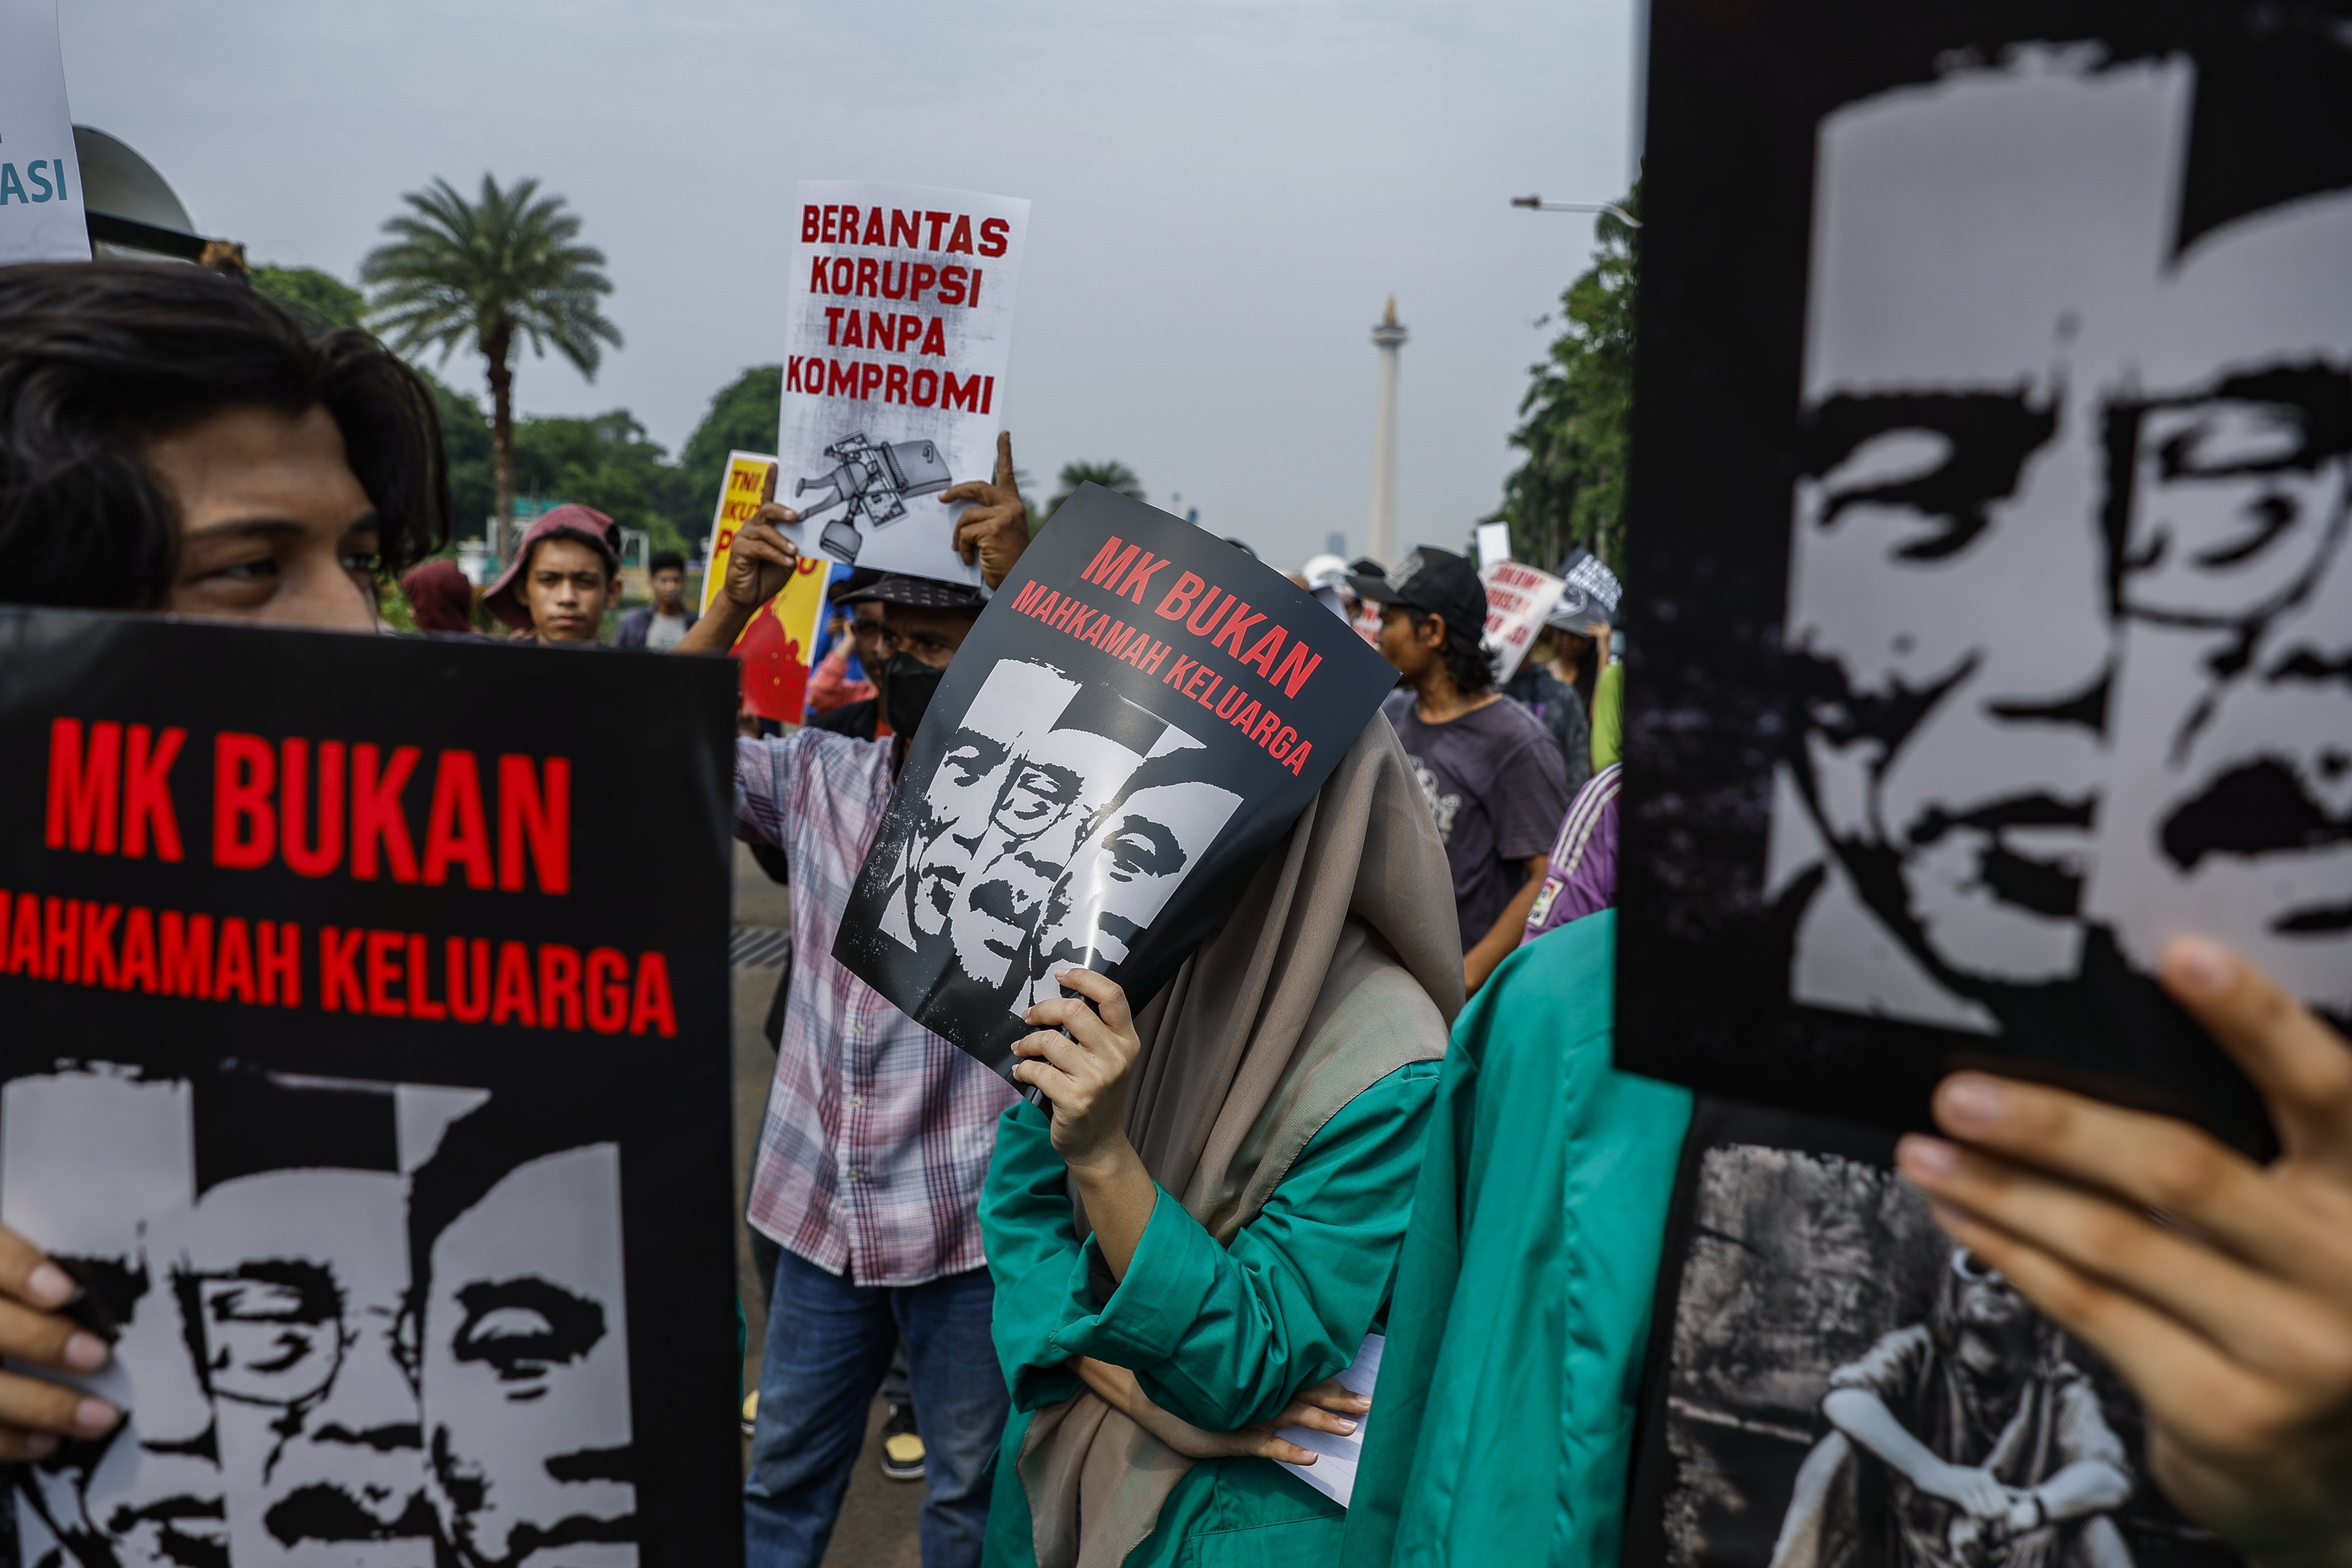 Protesters hold placards during a rally against political dynasties in Jakarta on December 7. Photo: EPA-EFE